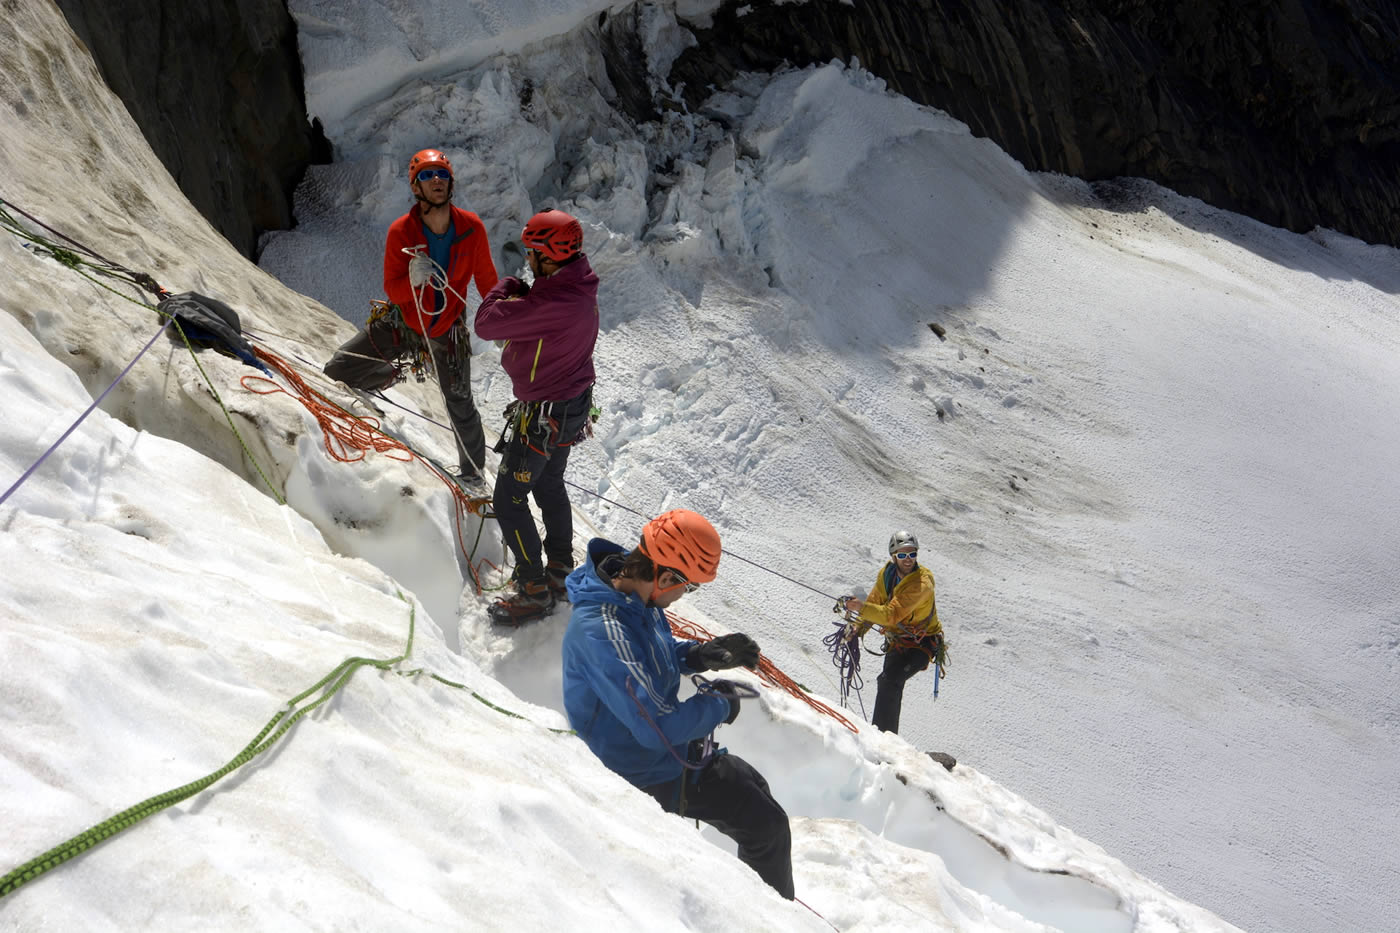 Access to the team's chosen line was barred by a 100-meter overhanging serac. With four ice screws, this proved to be a very intense moment for the group. Left to right are Jerome Sullivan, Fabio Lupo, Christian Ledergerber and Antoine Moineville. [Photo] Silvan Schuepbach